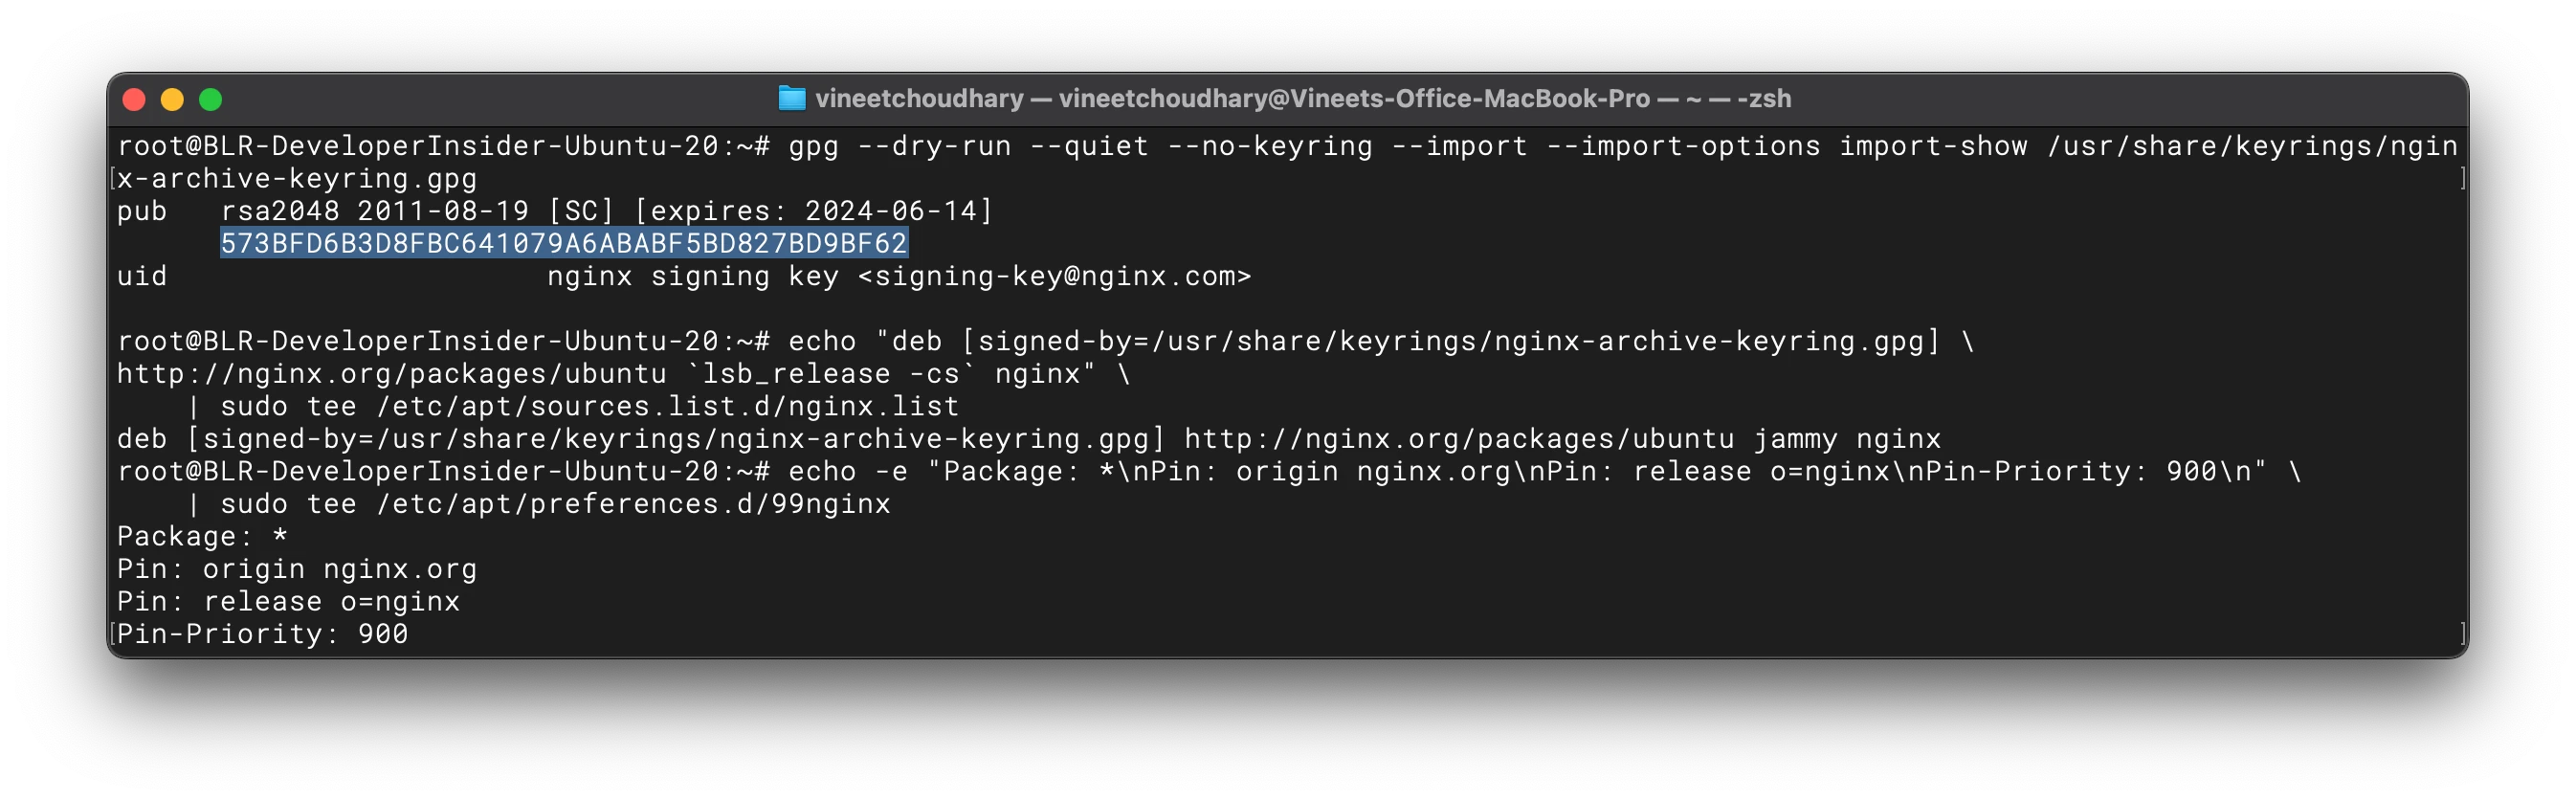 Install/Update Nginx to the latest stable version on Ubuntu